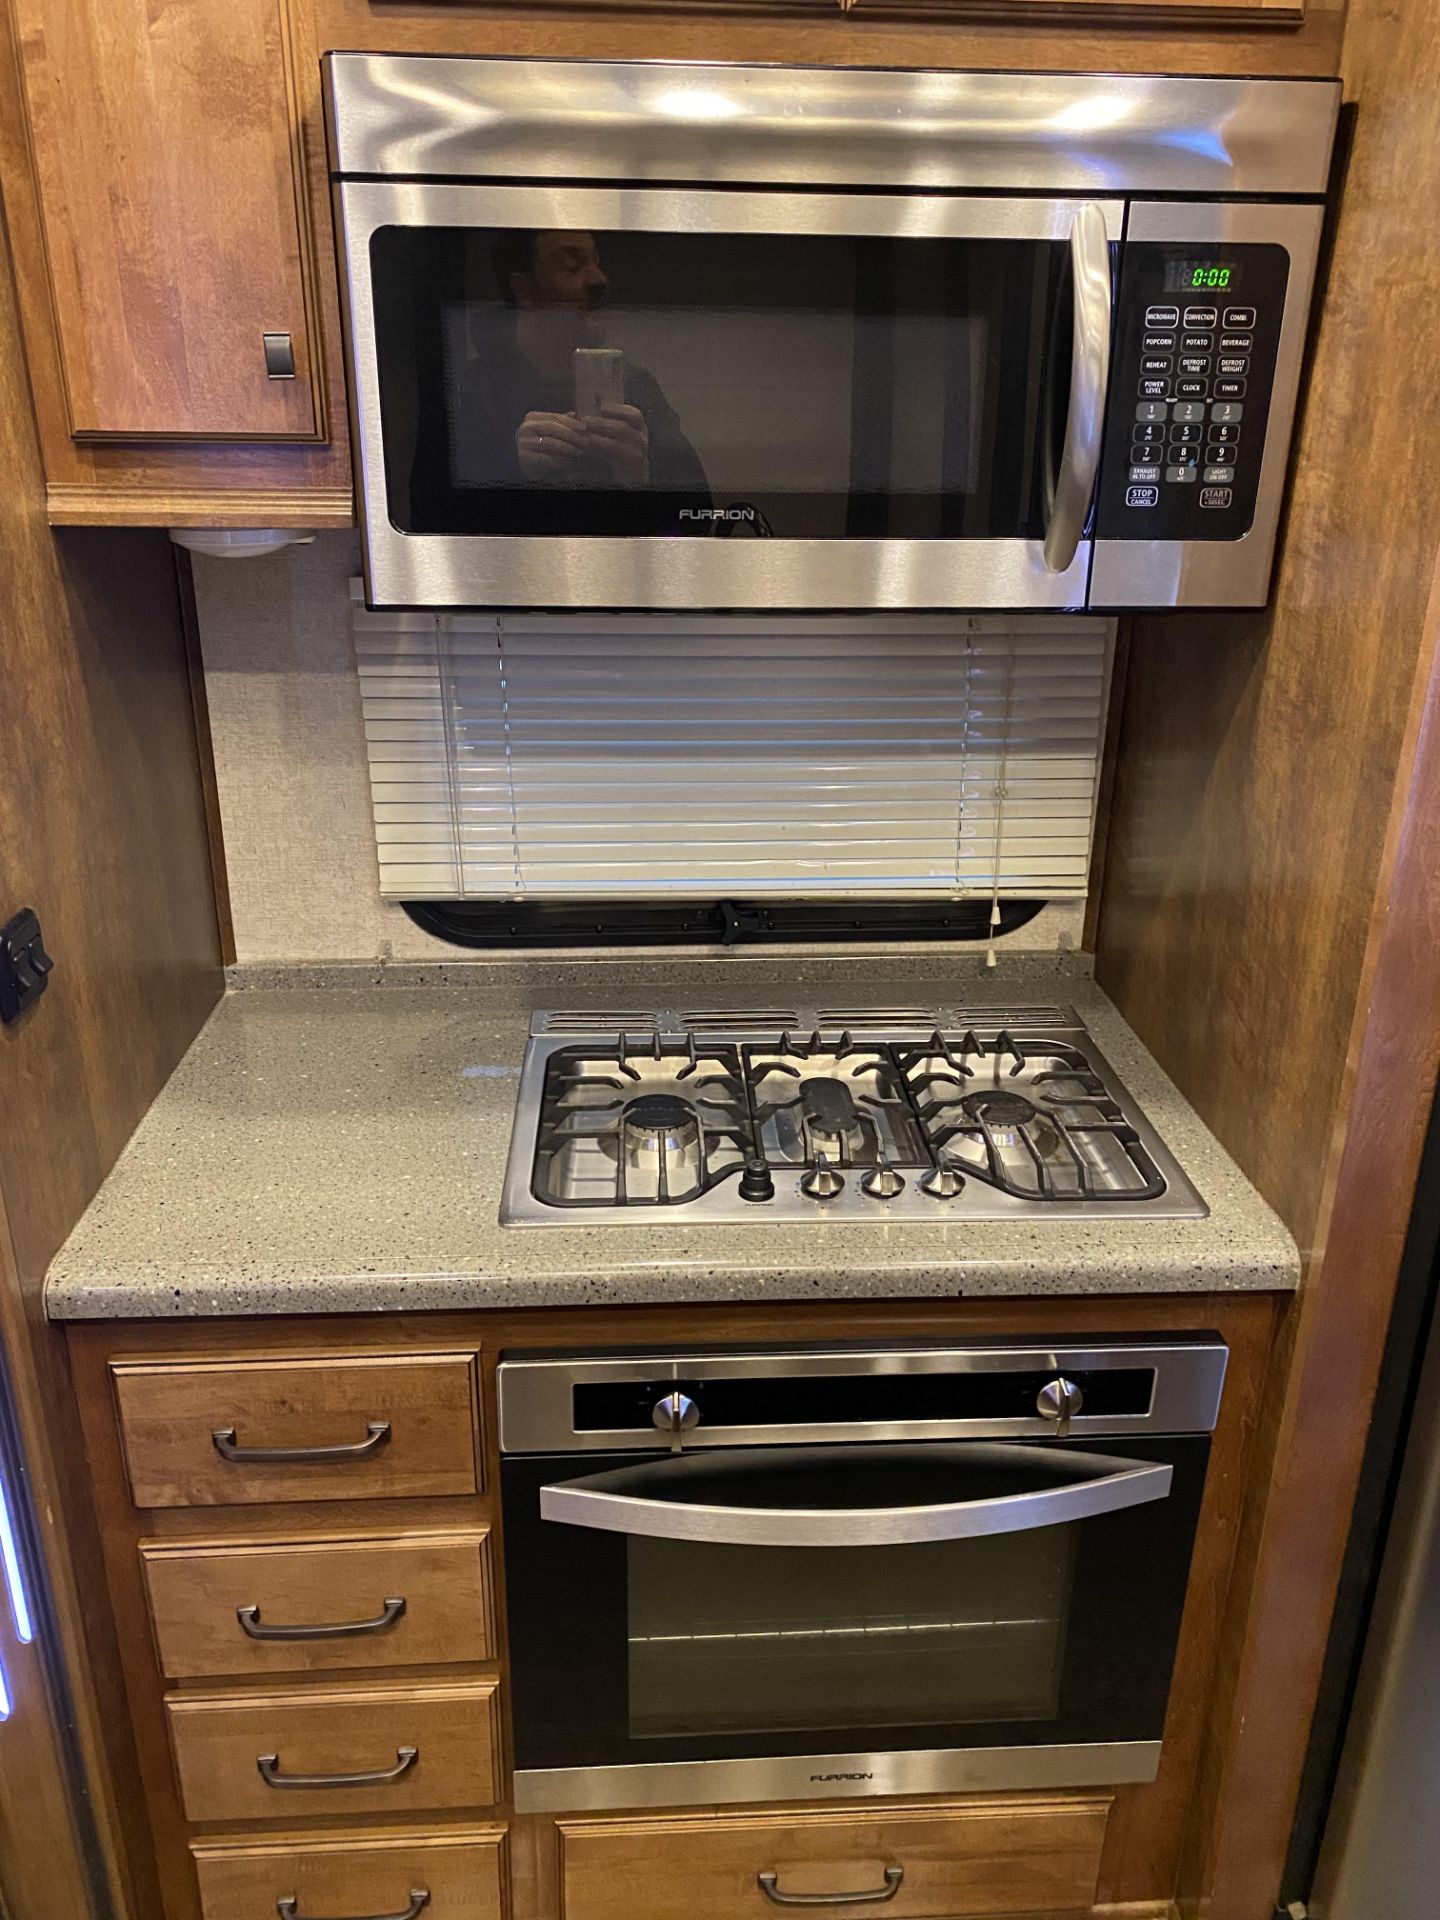 2018 Big Country 5th Wheel Camper Model 3965DSS w/4 Slide Outs - SEE VIDEO & DESCRIPTION - Image 35 of 38